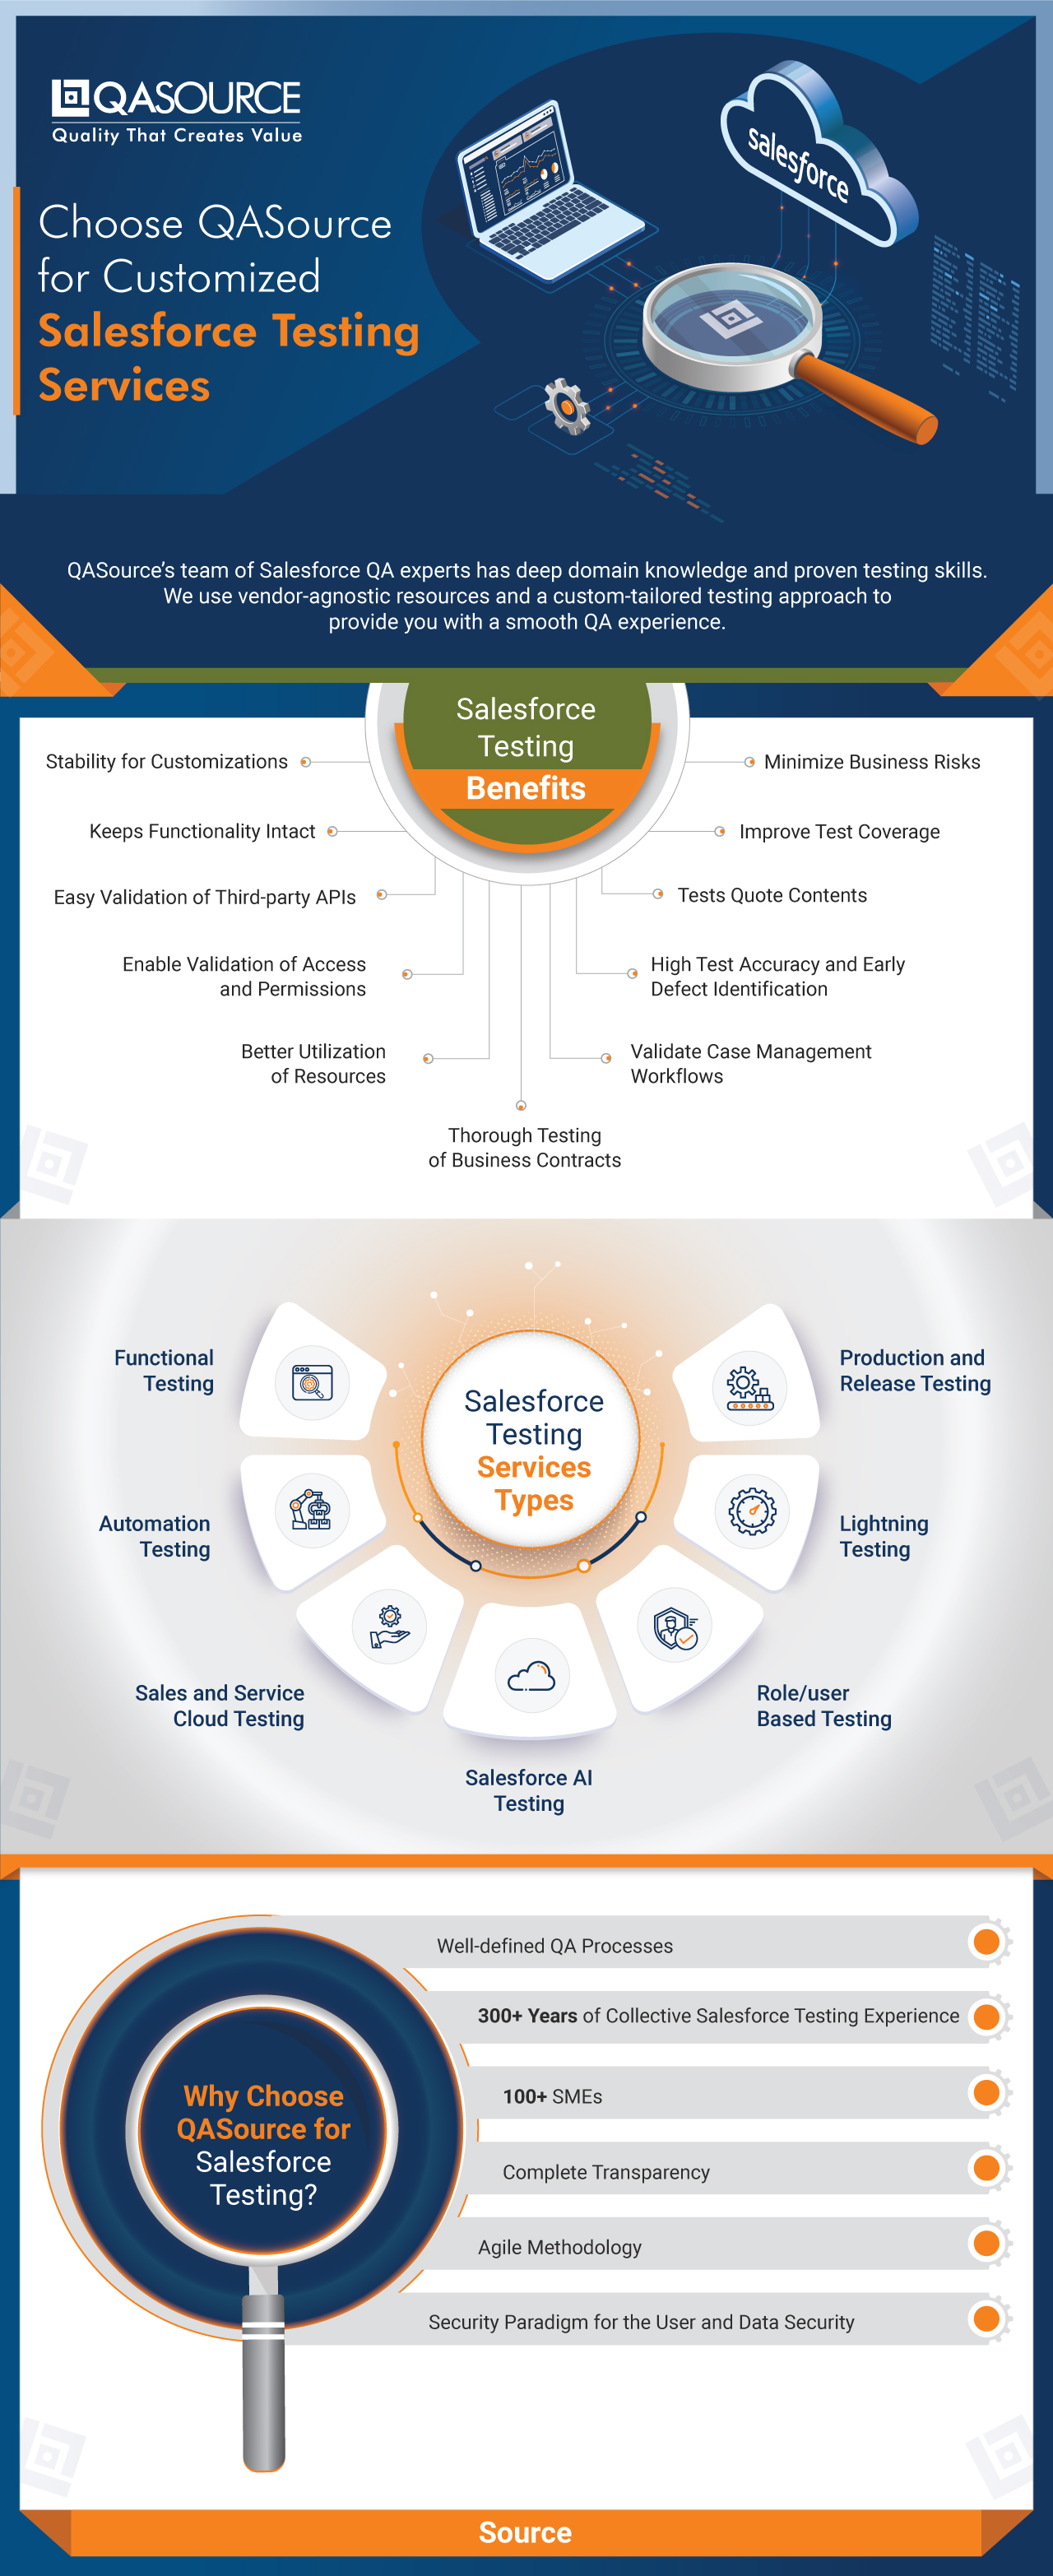 Choose QASource for Customized Salesforce Testing Services